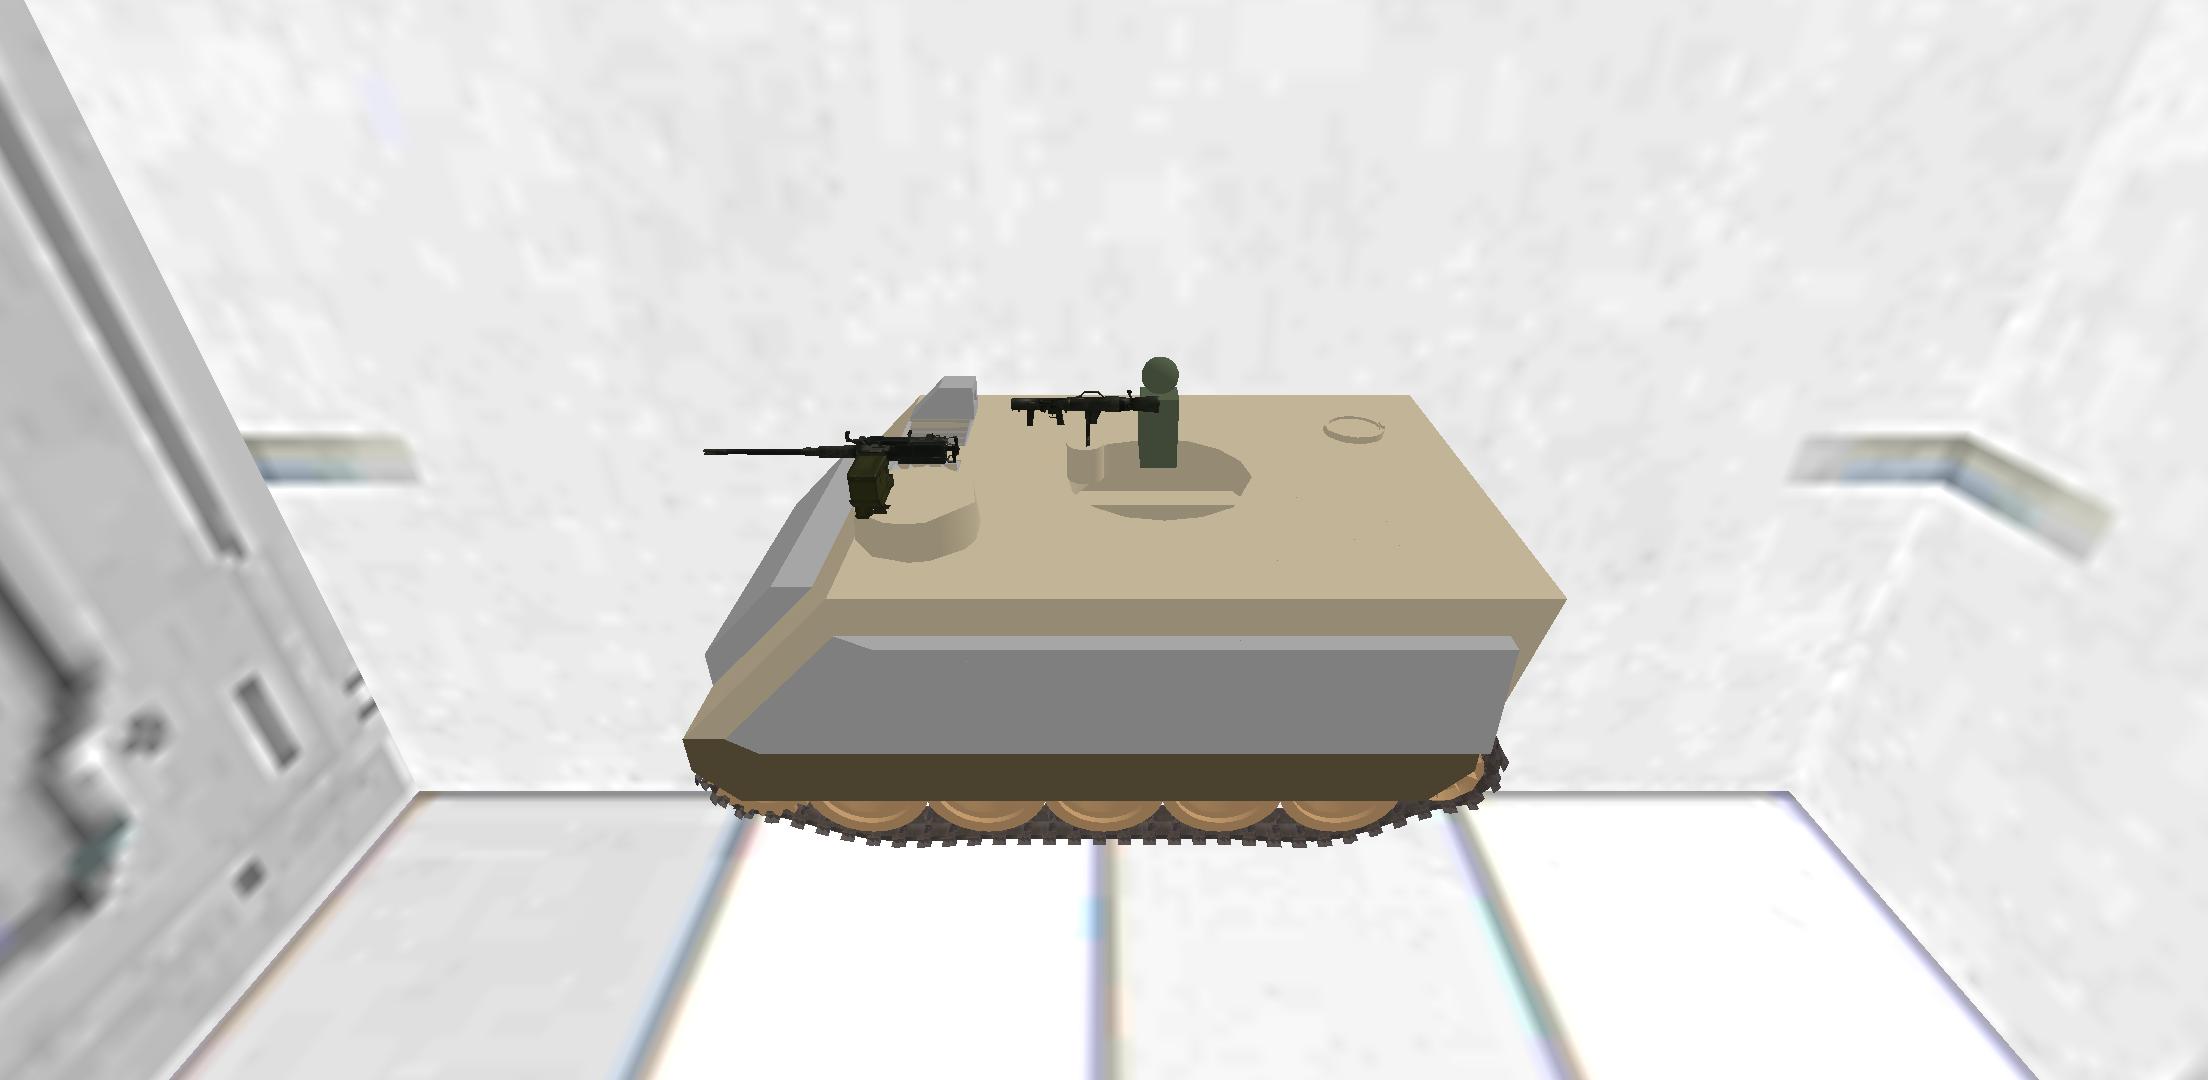 M113(TOW)